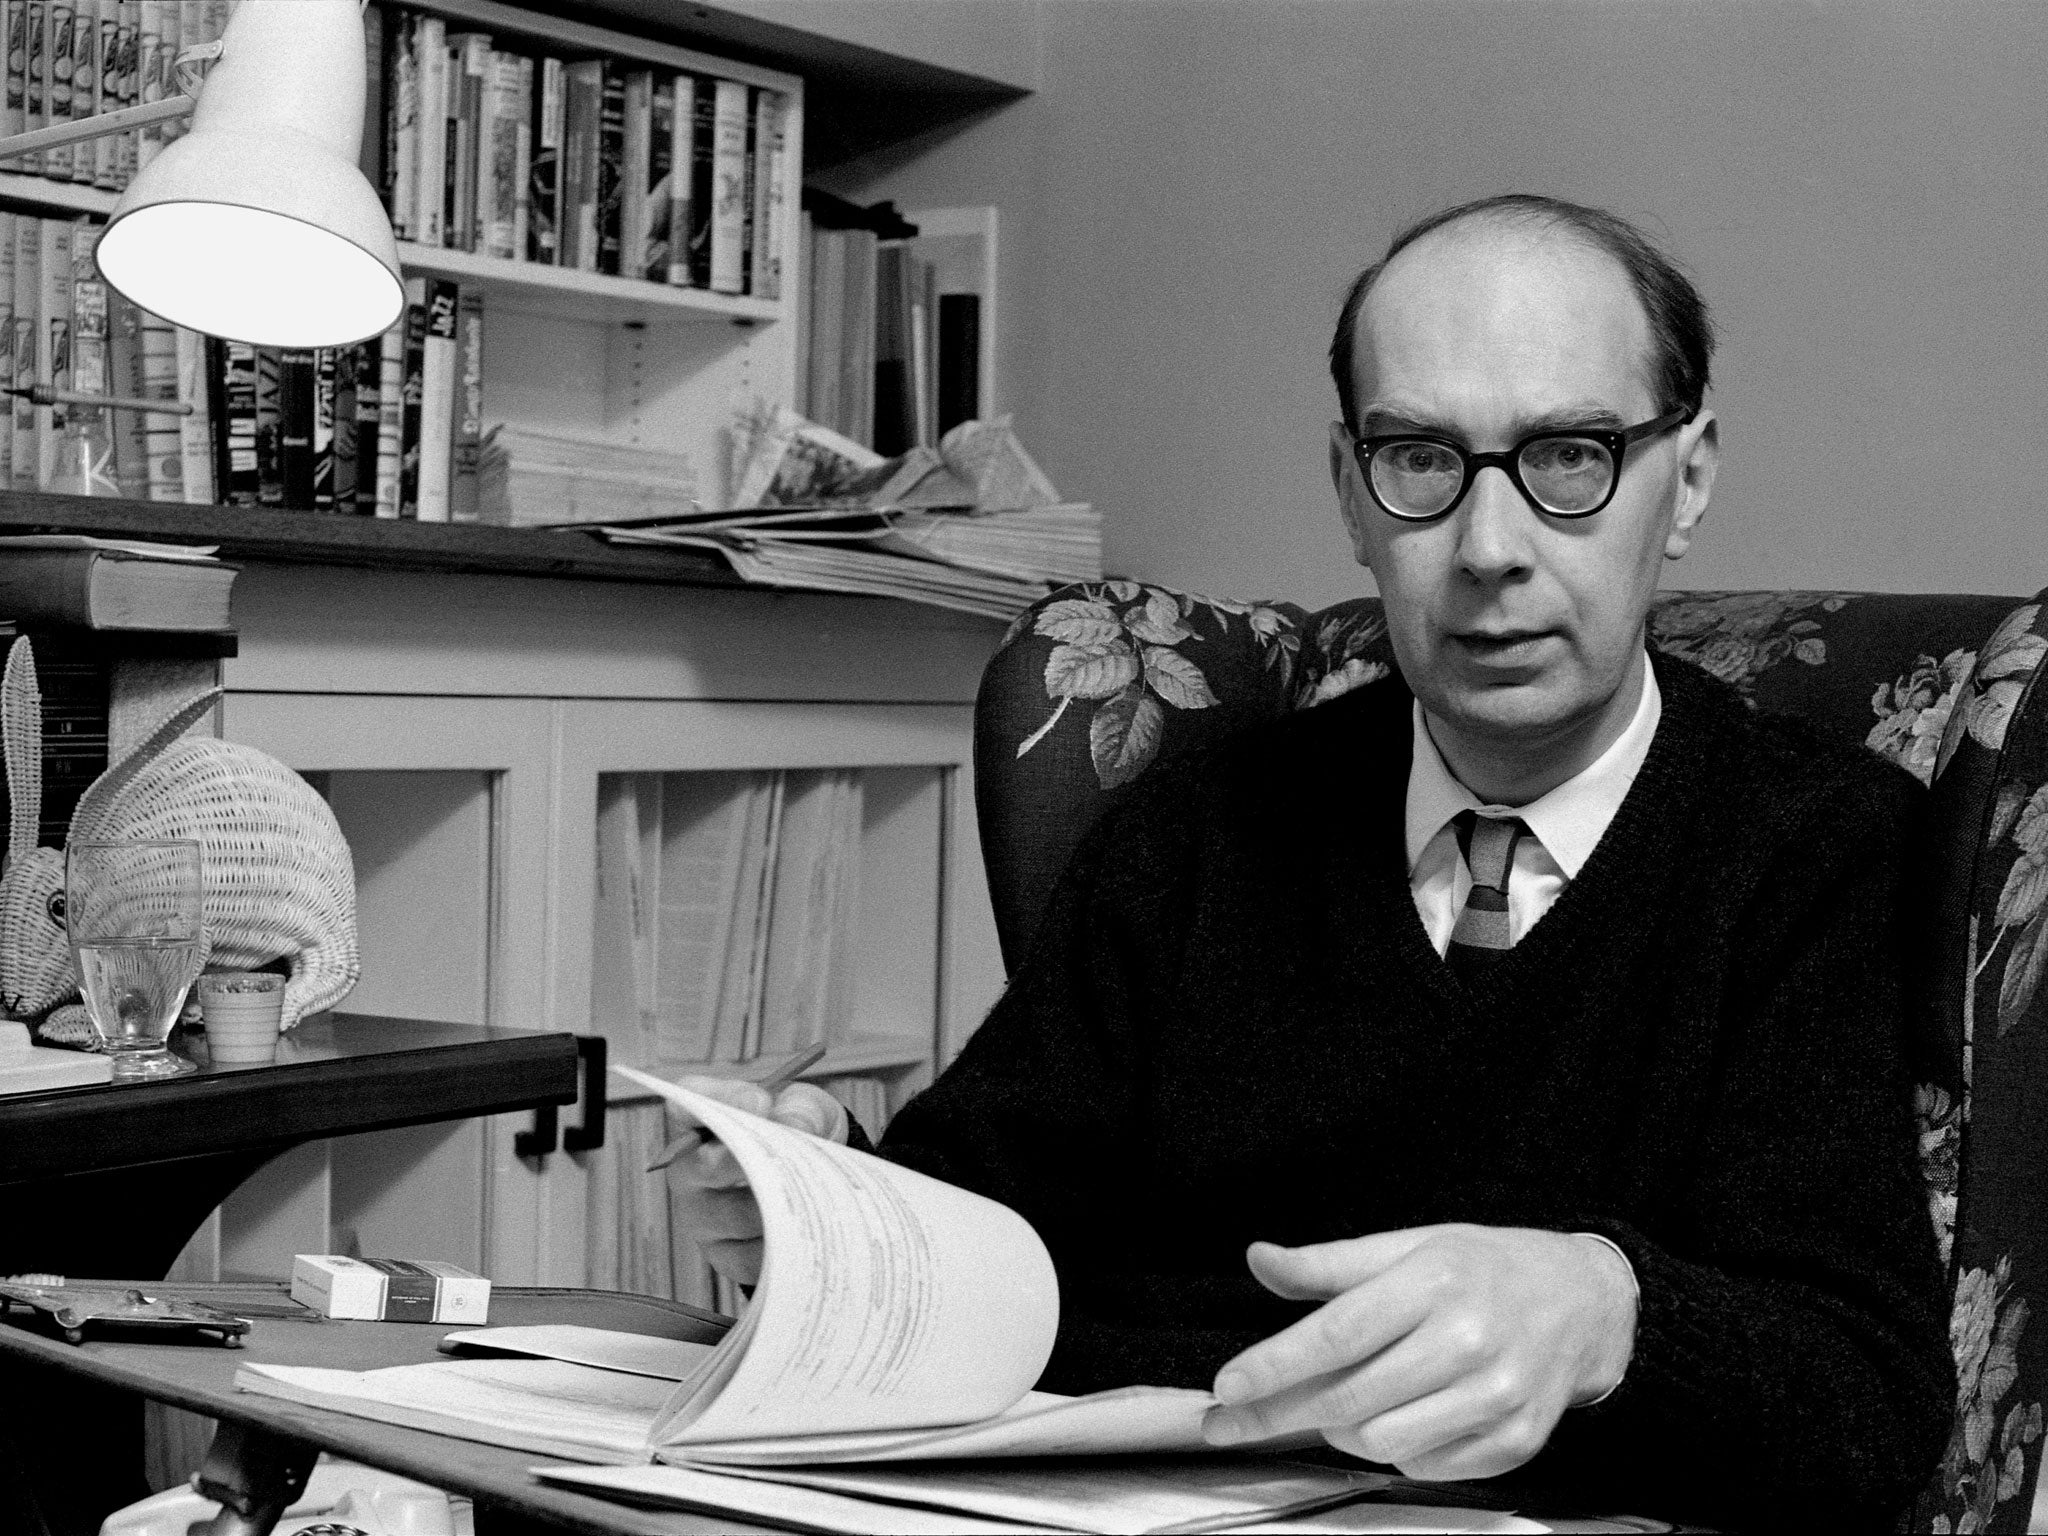 Larkin was England’s famously provincial and sardonic poet-cum-librarian